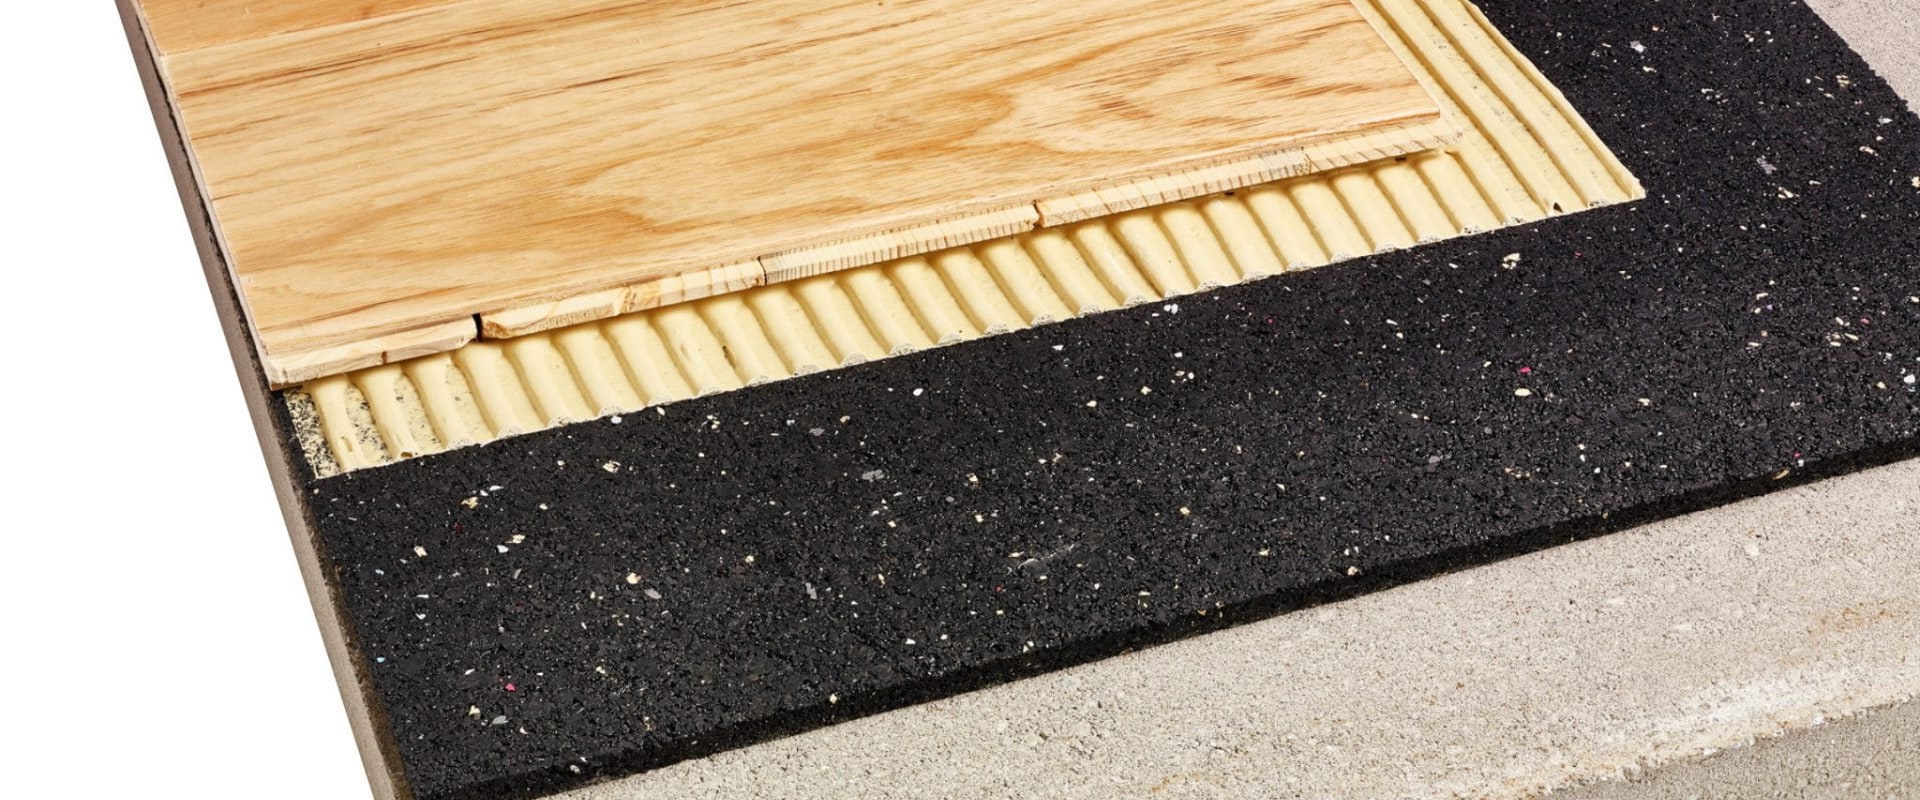 How Long Does it Take to Install Acoustic Underlay for a Wooden Floor?